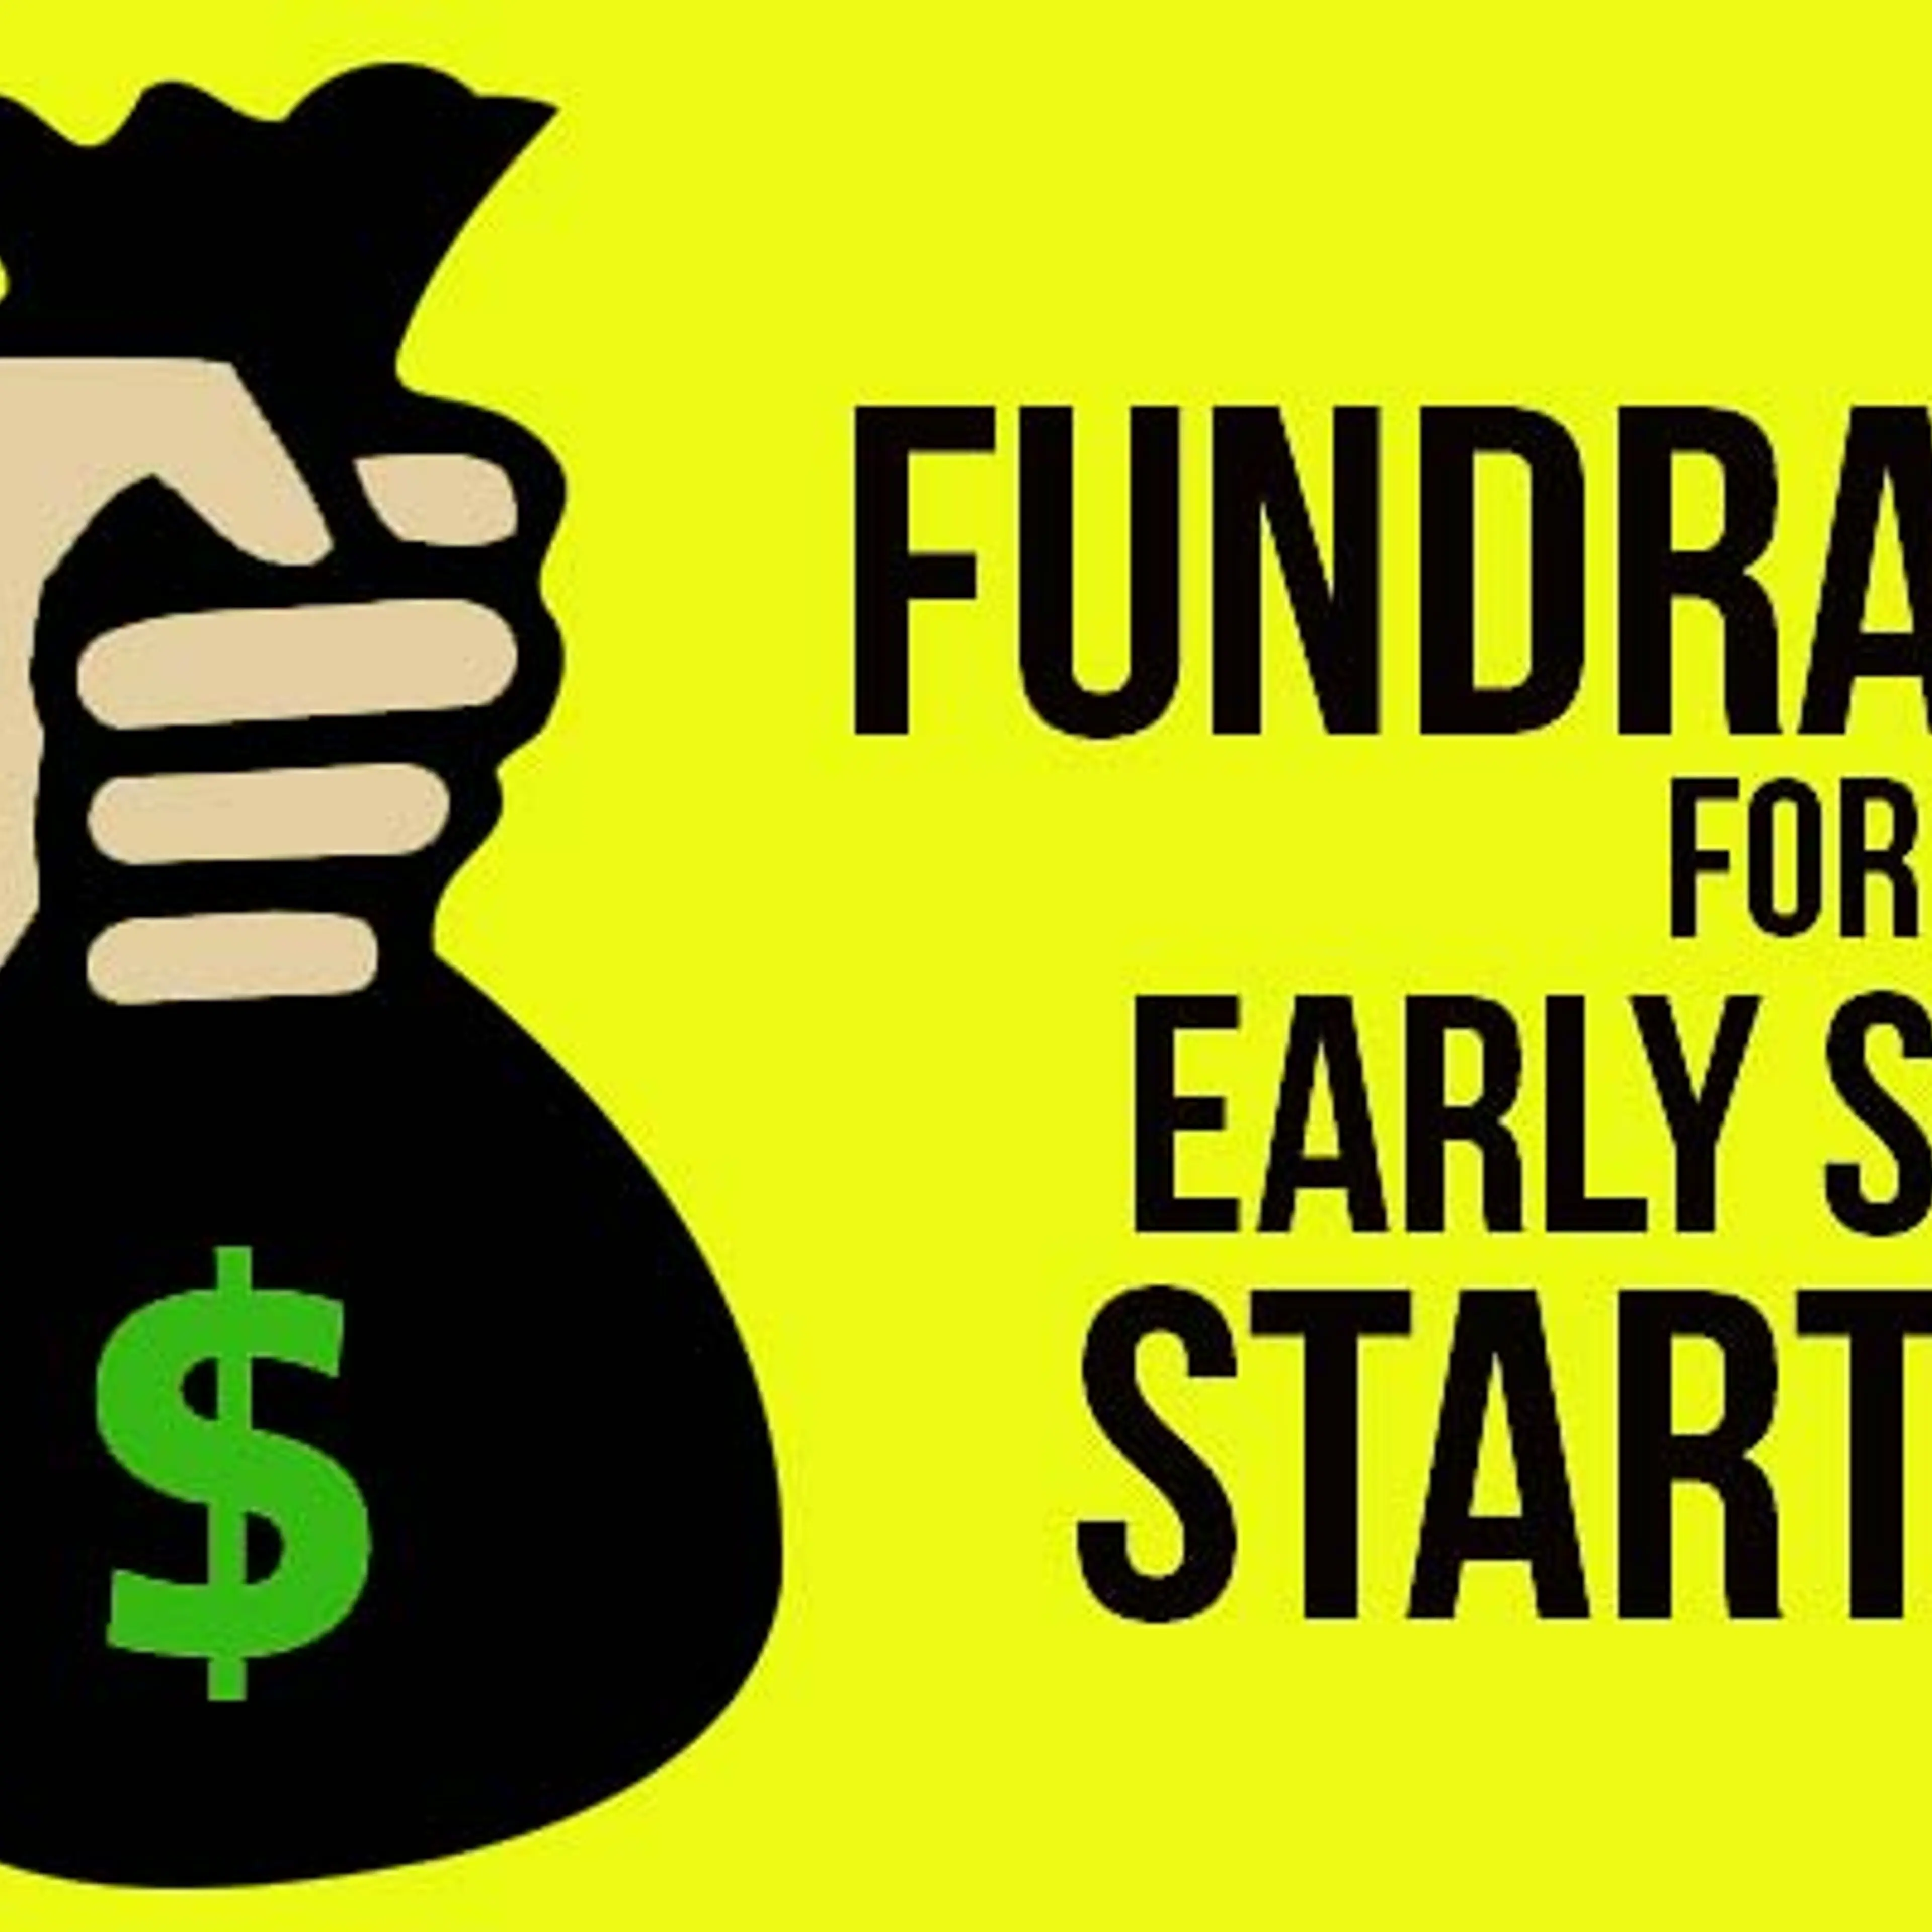 Fundraising for early stage entrepreneurs 101